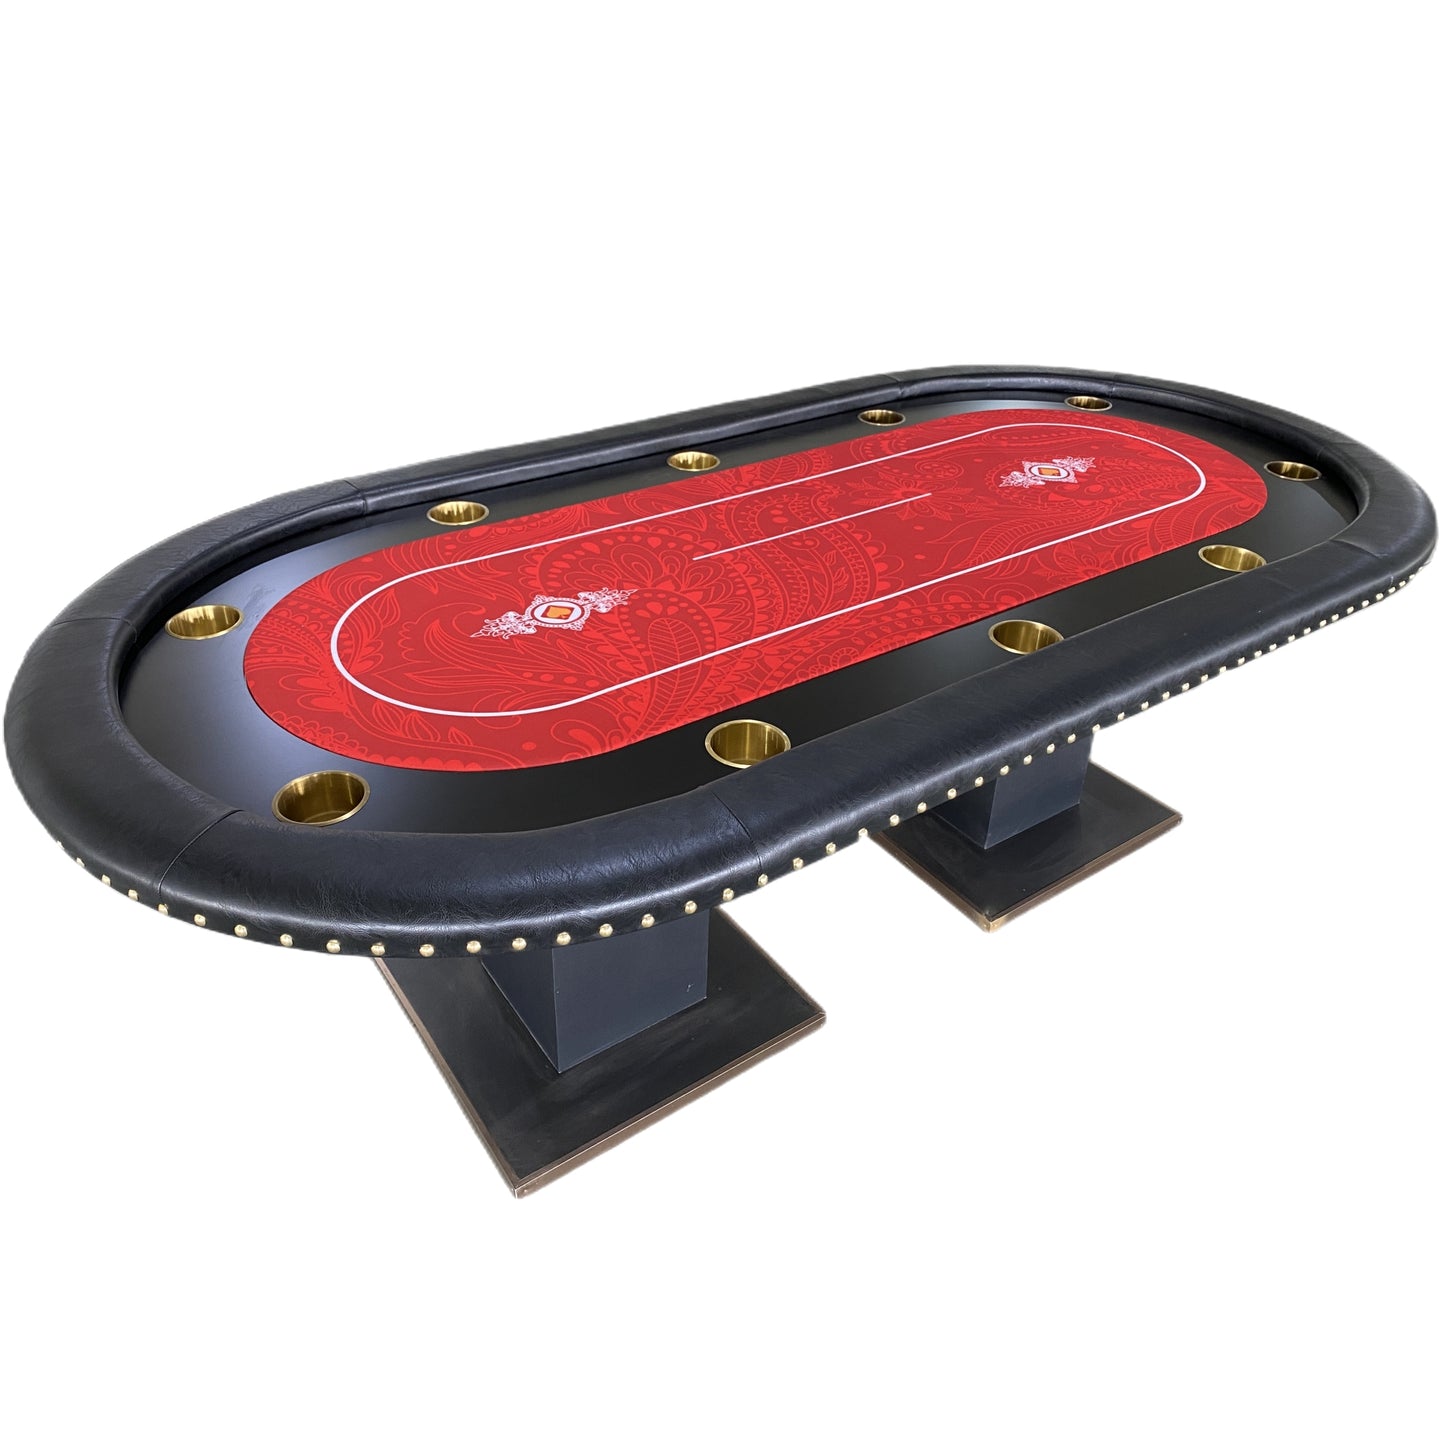 IDS CWS 96" Poker Table 2202R